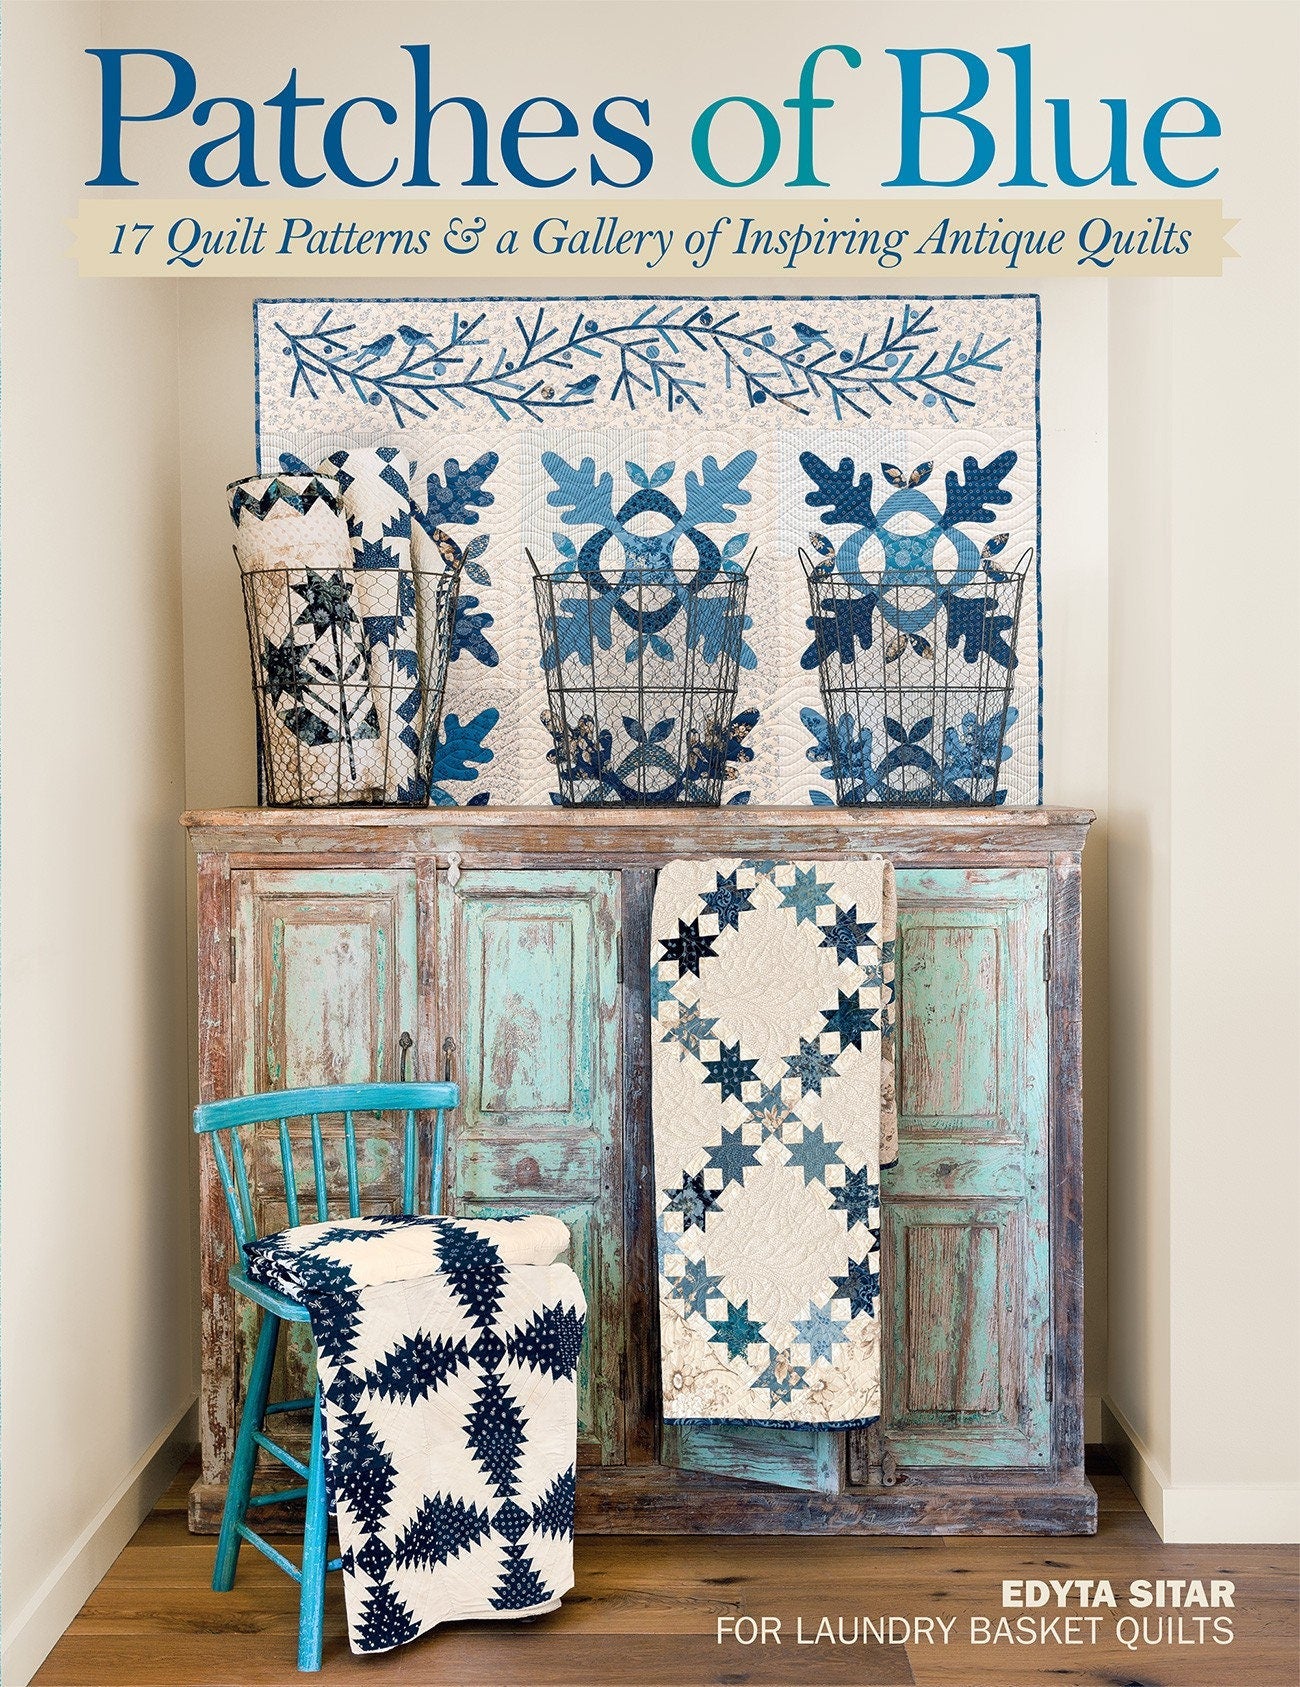 Patches Of Blue Quilt Book by Edyta Sitar of Laundry Basket Quilts